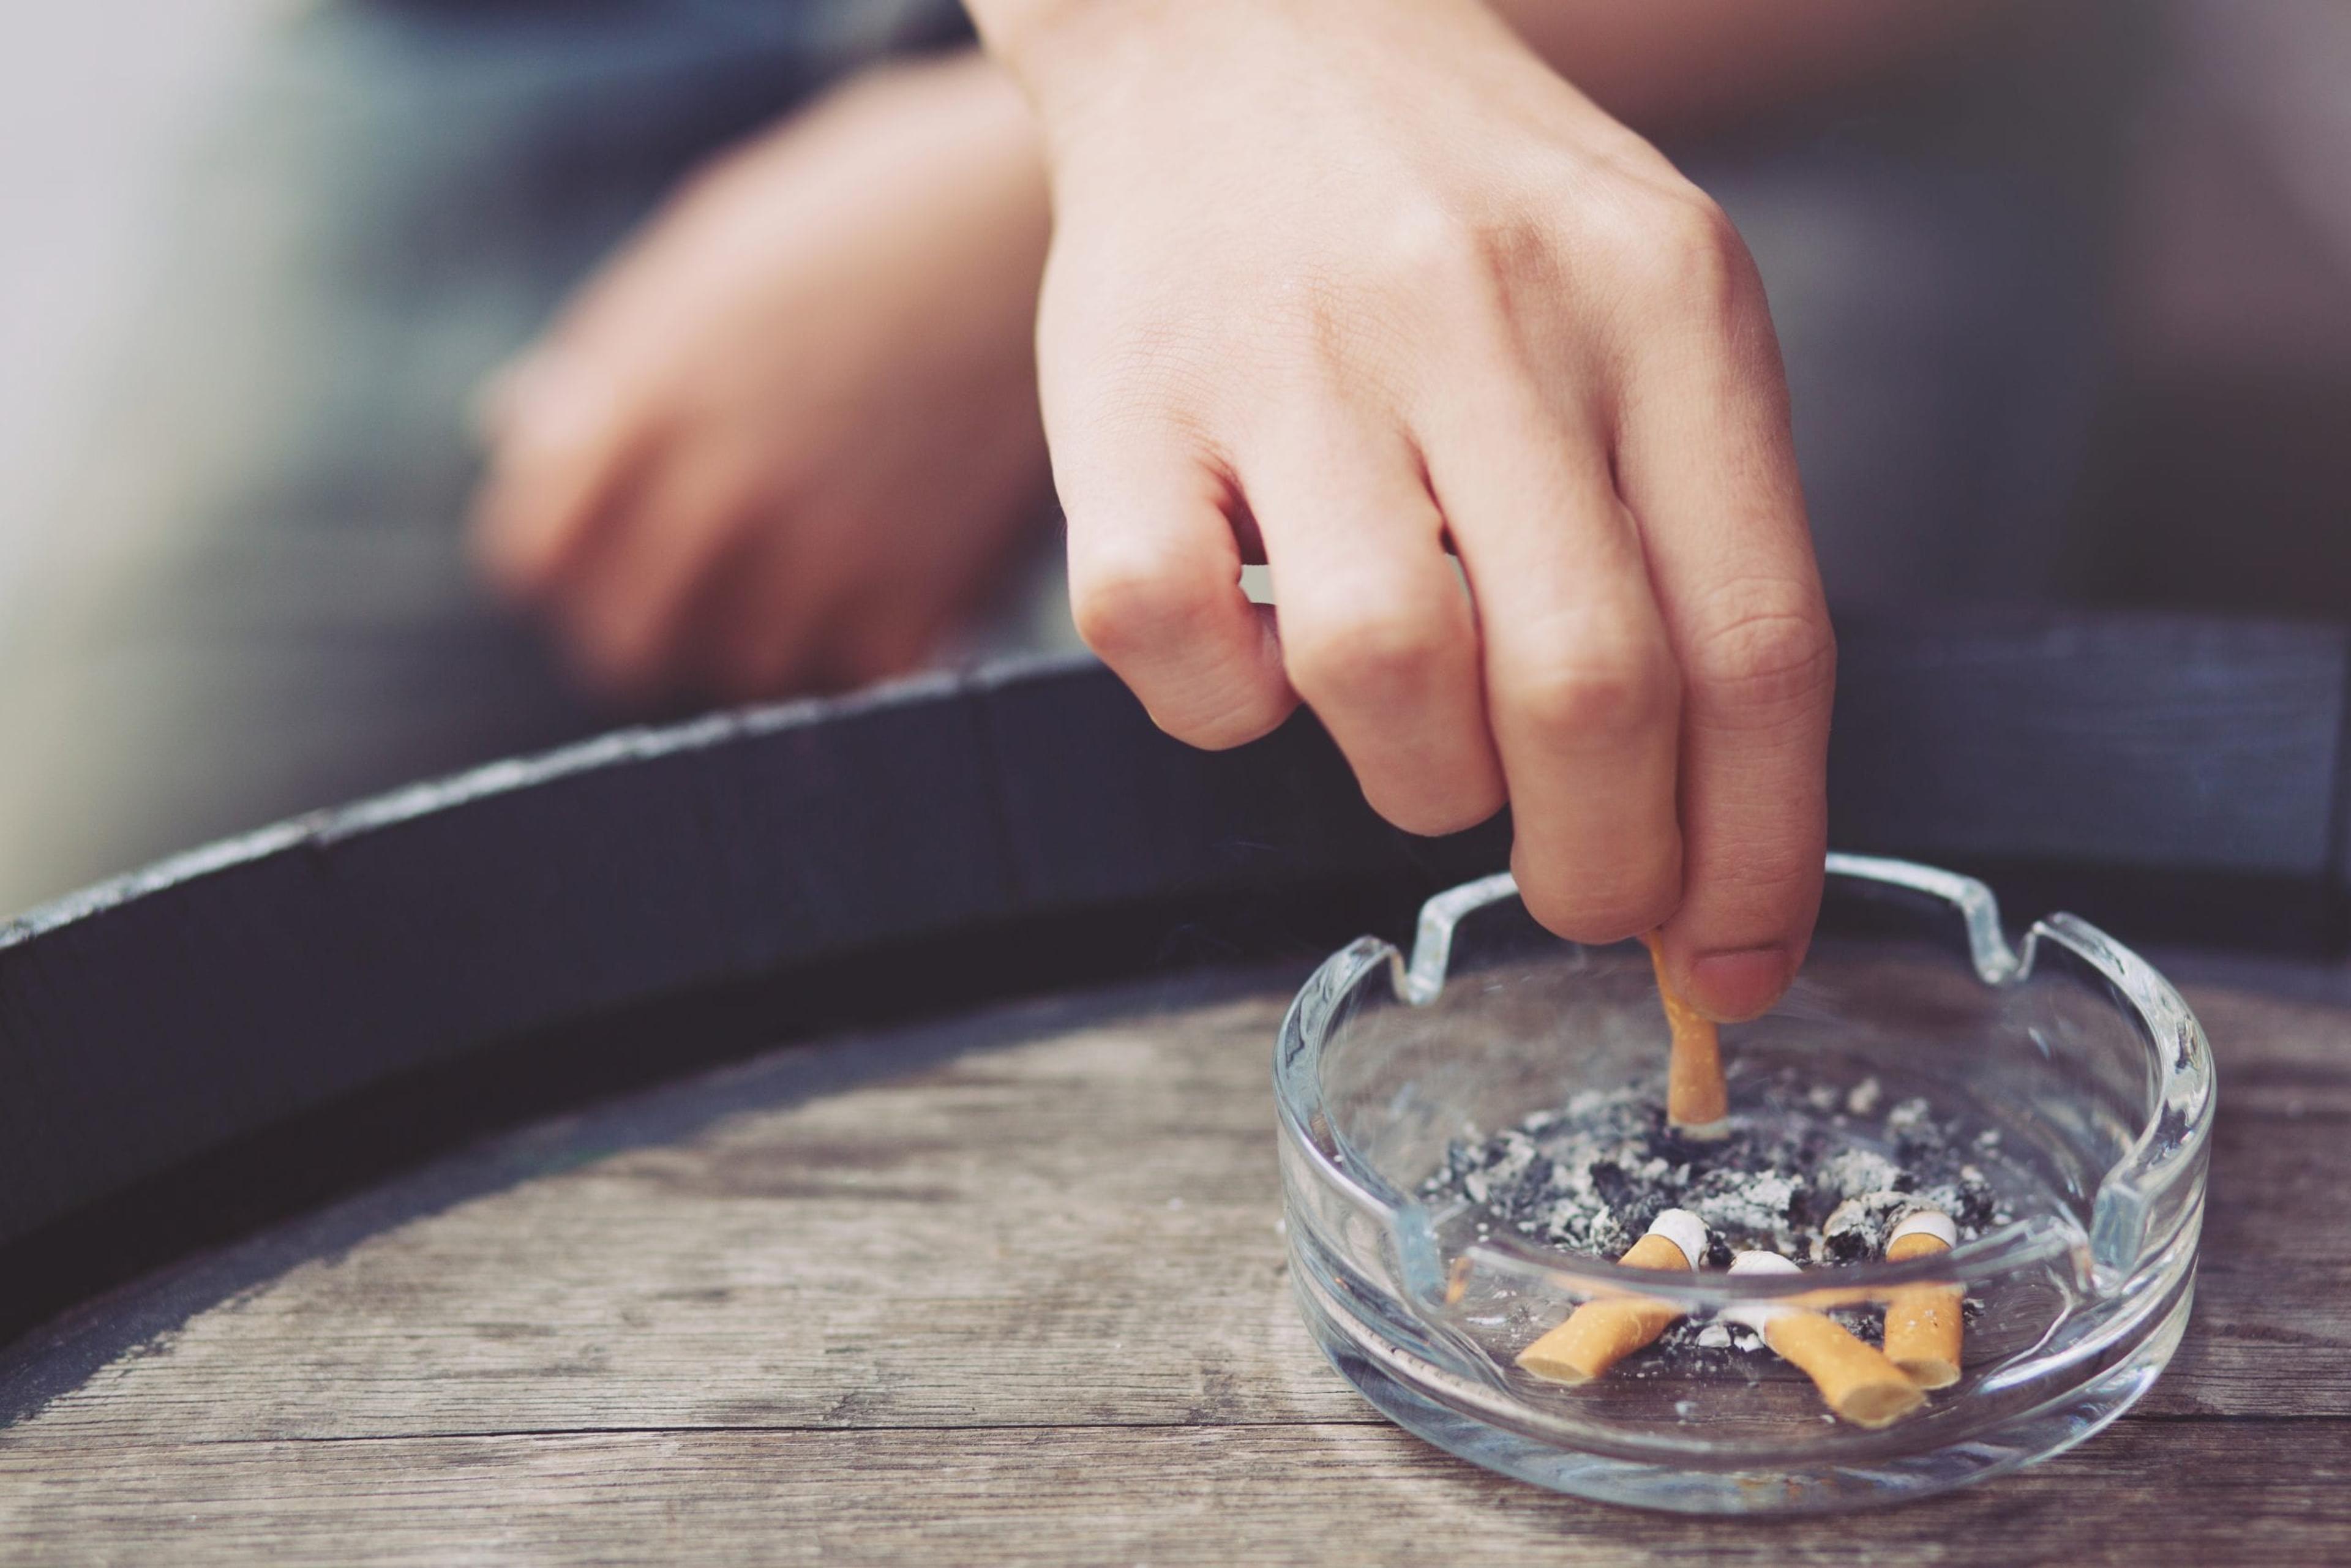 Hand putting out cigarette in an ashtray